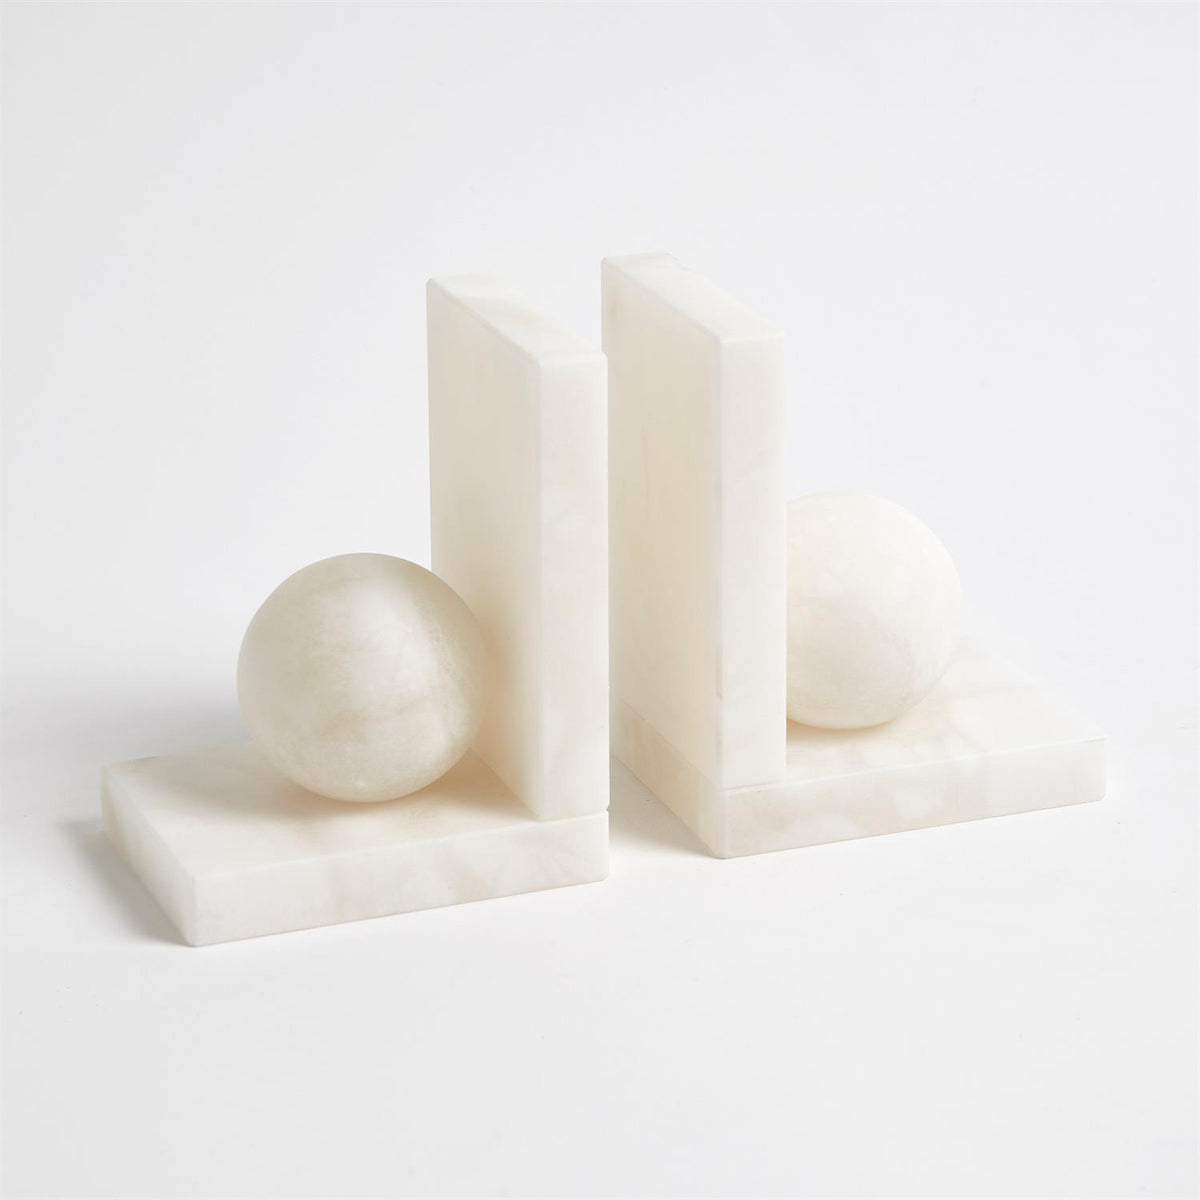 Alabaster Ball Bookends - Set of 2